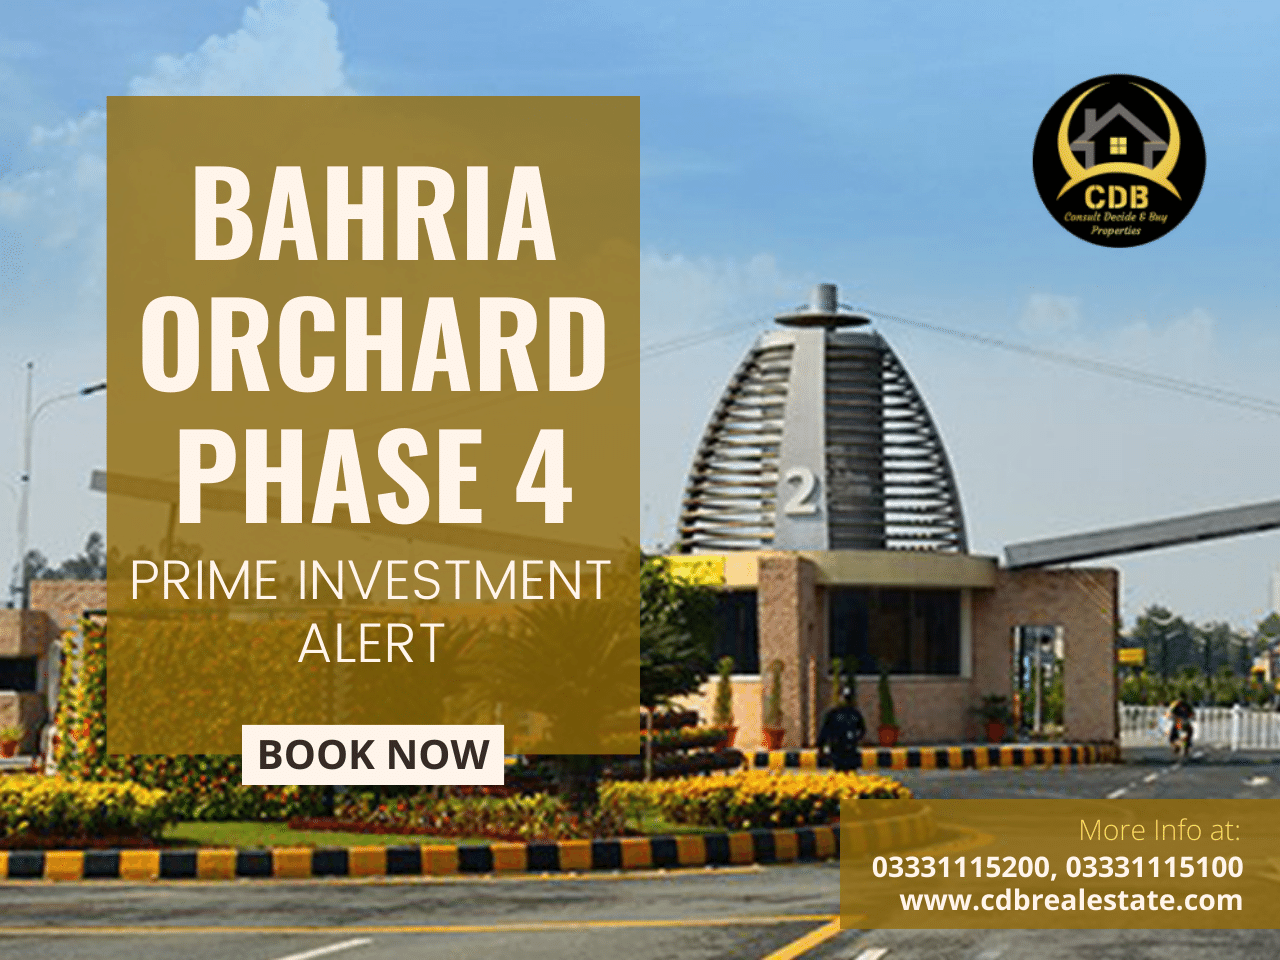 Prime Investment in Bahria Orchard Phase 4